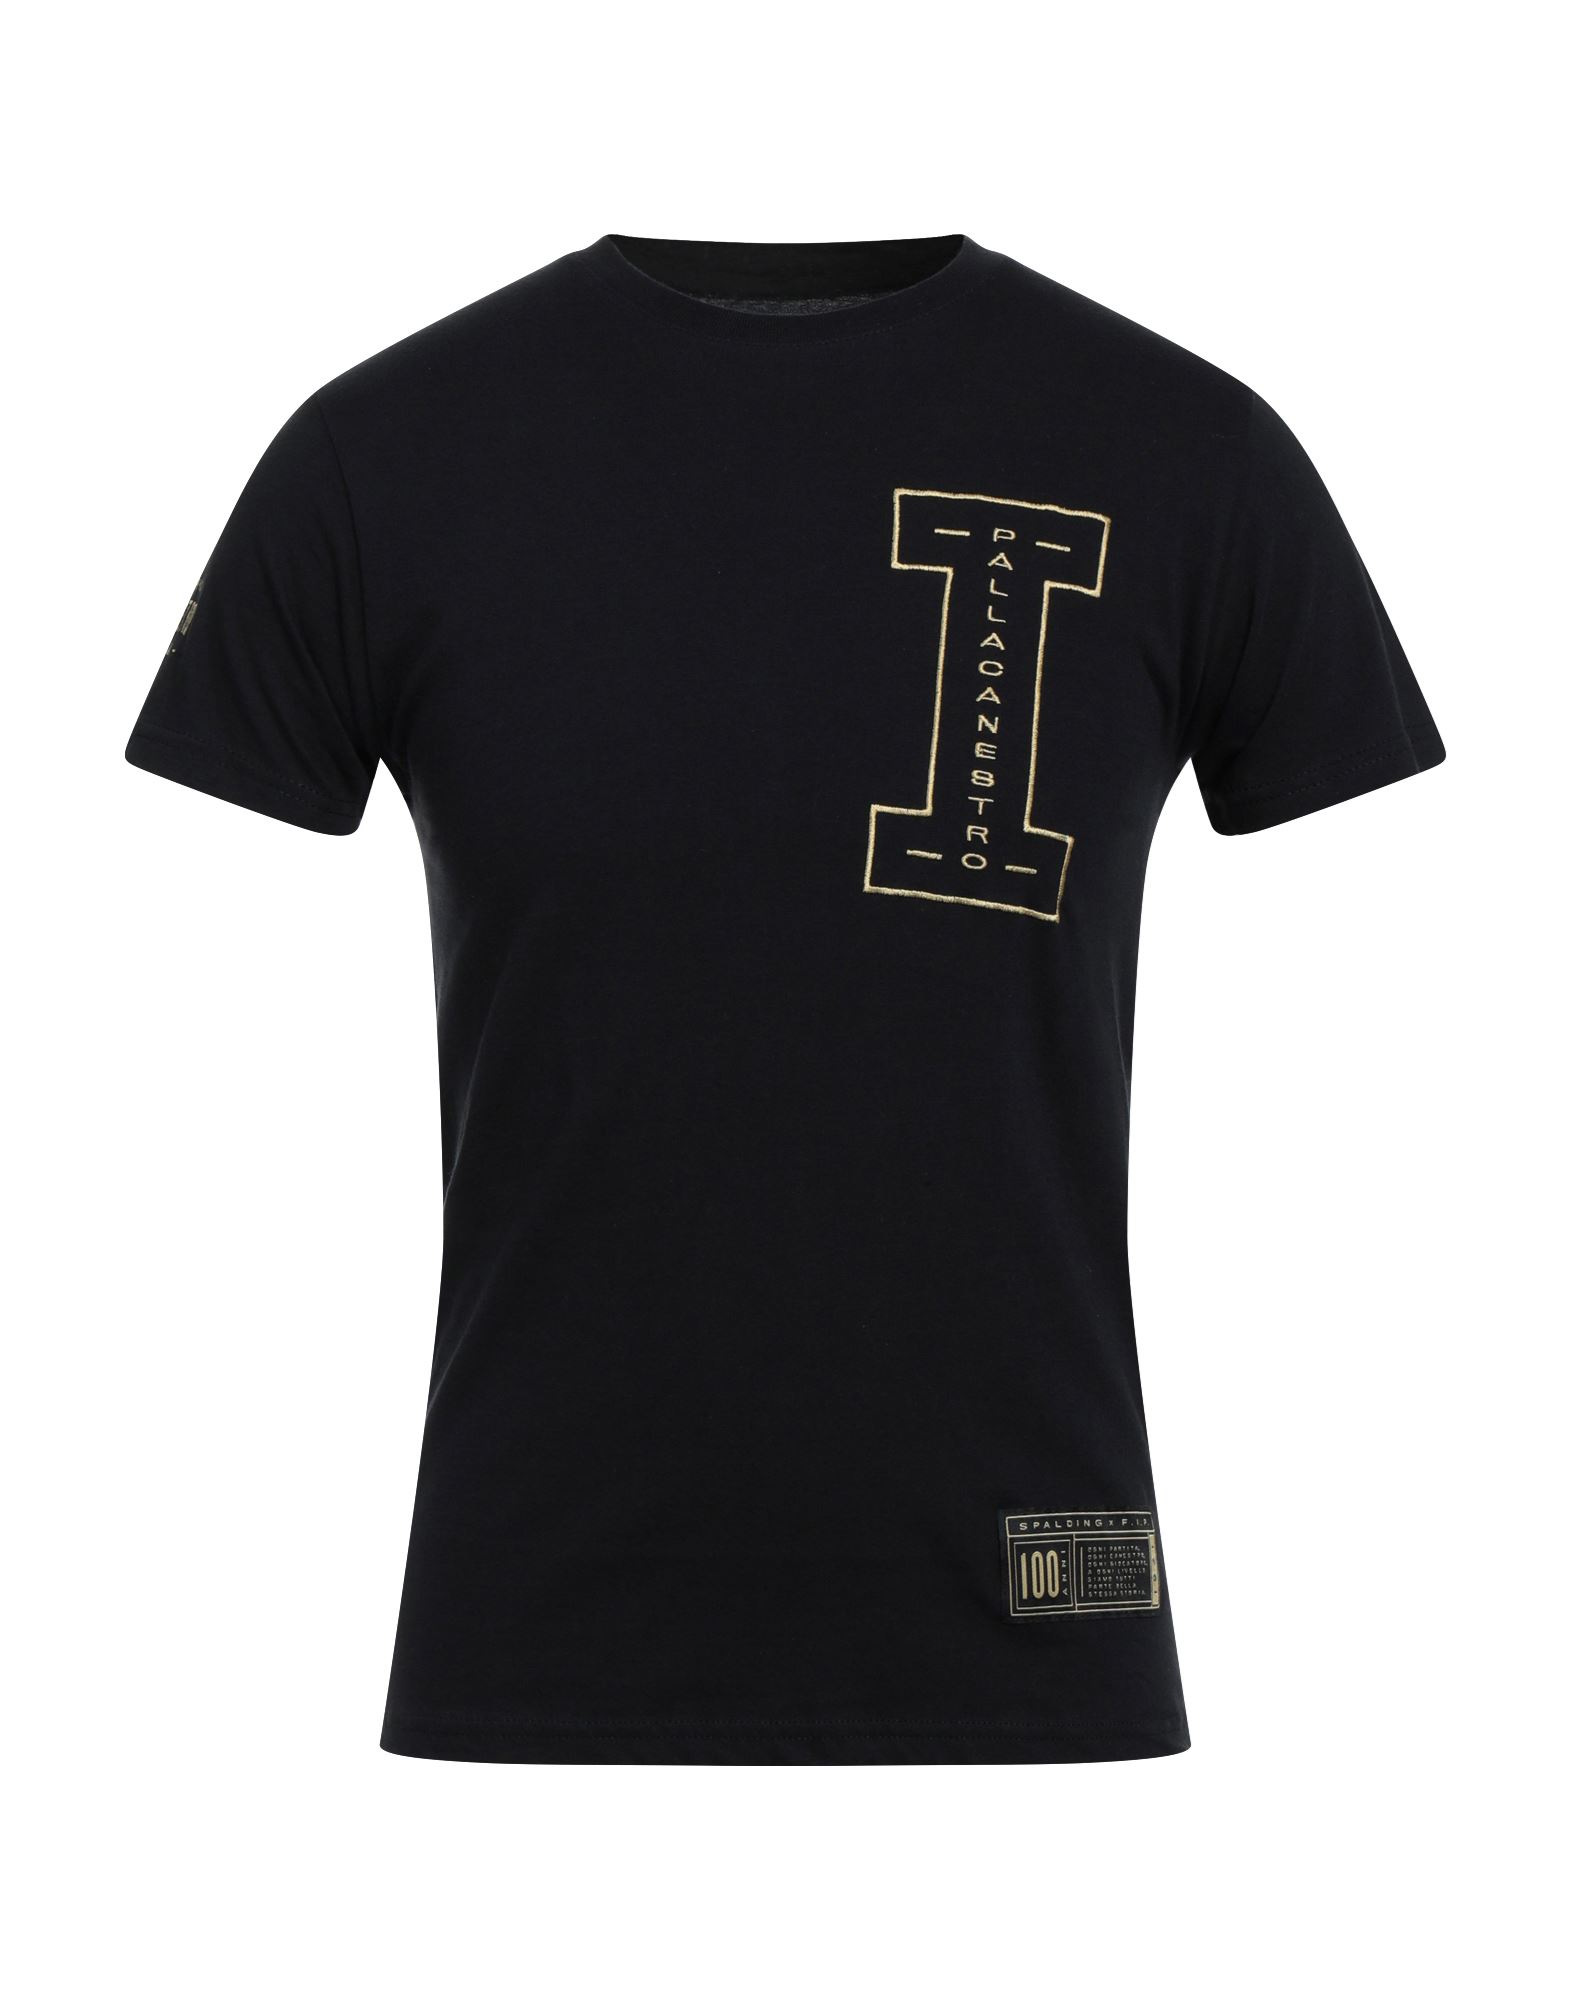 Spalding T-shirts In Black